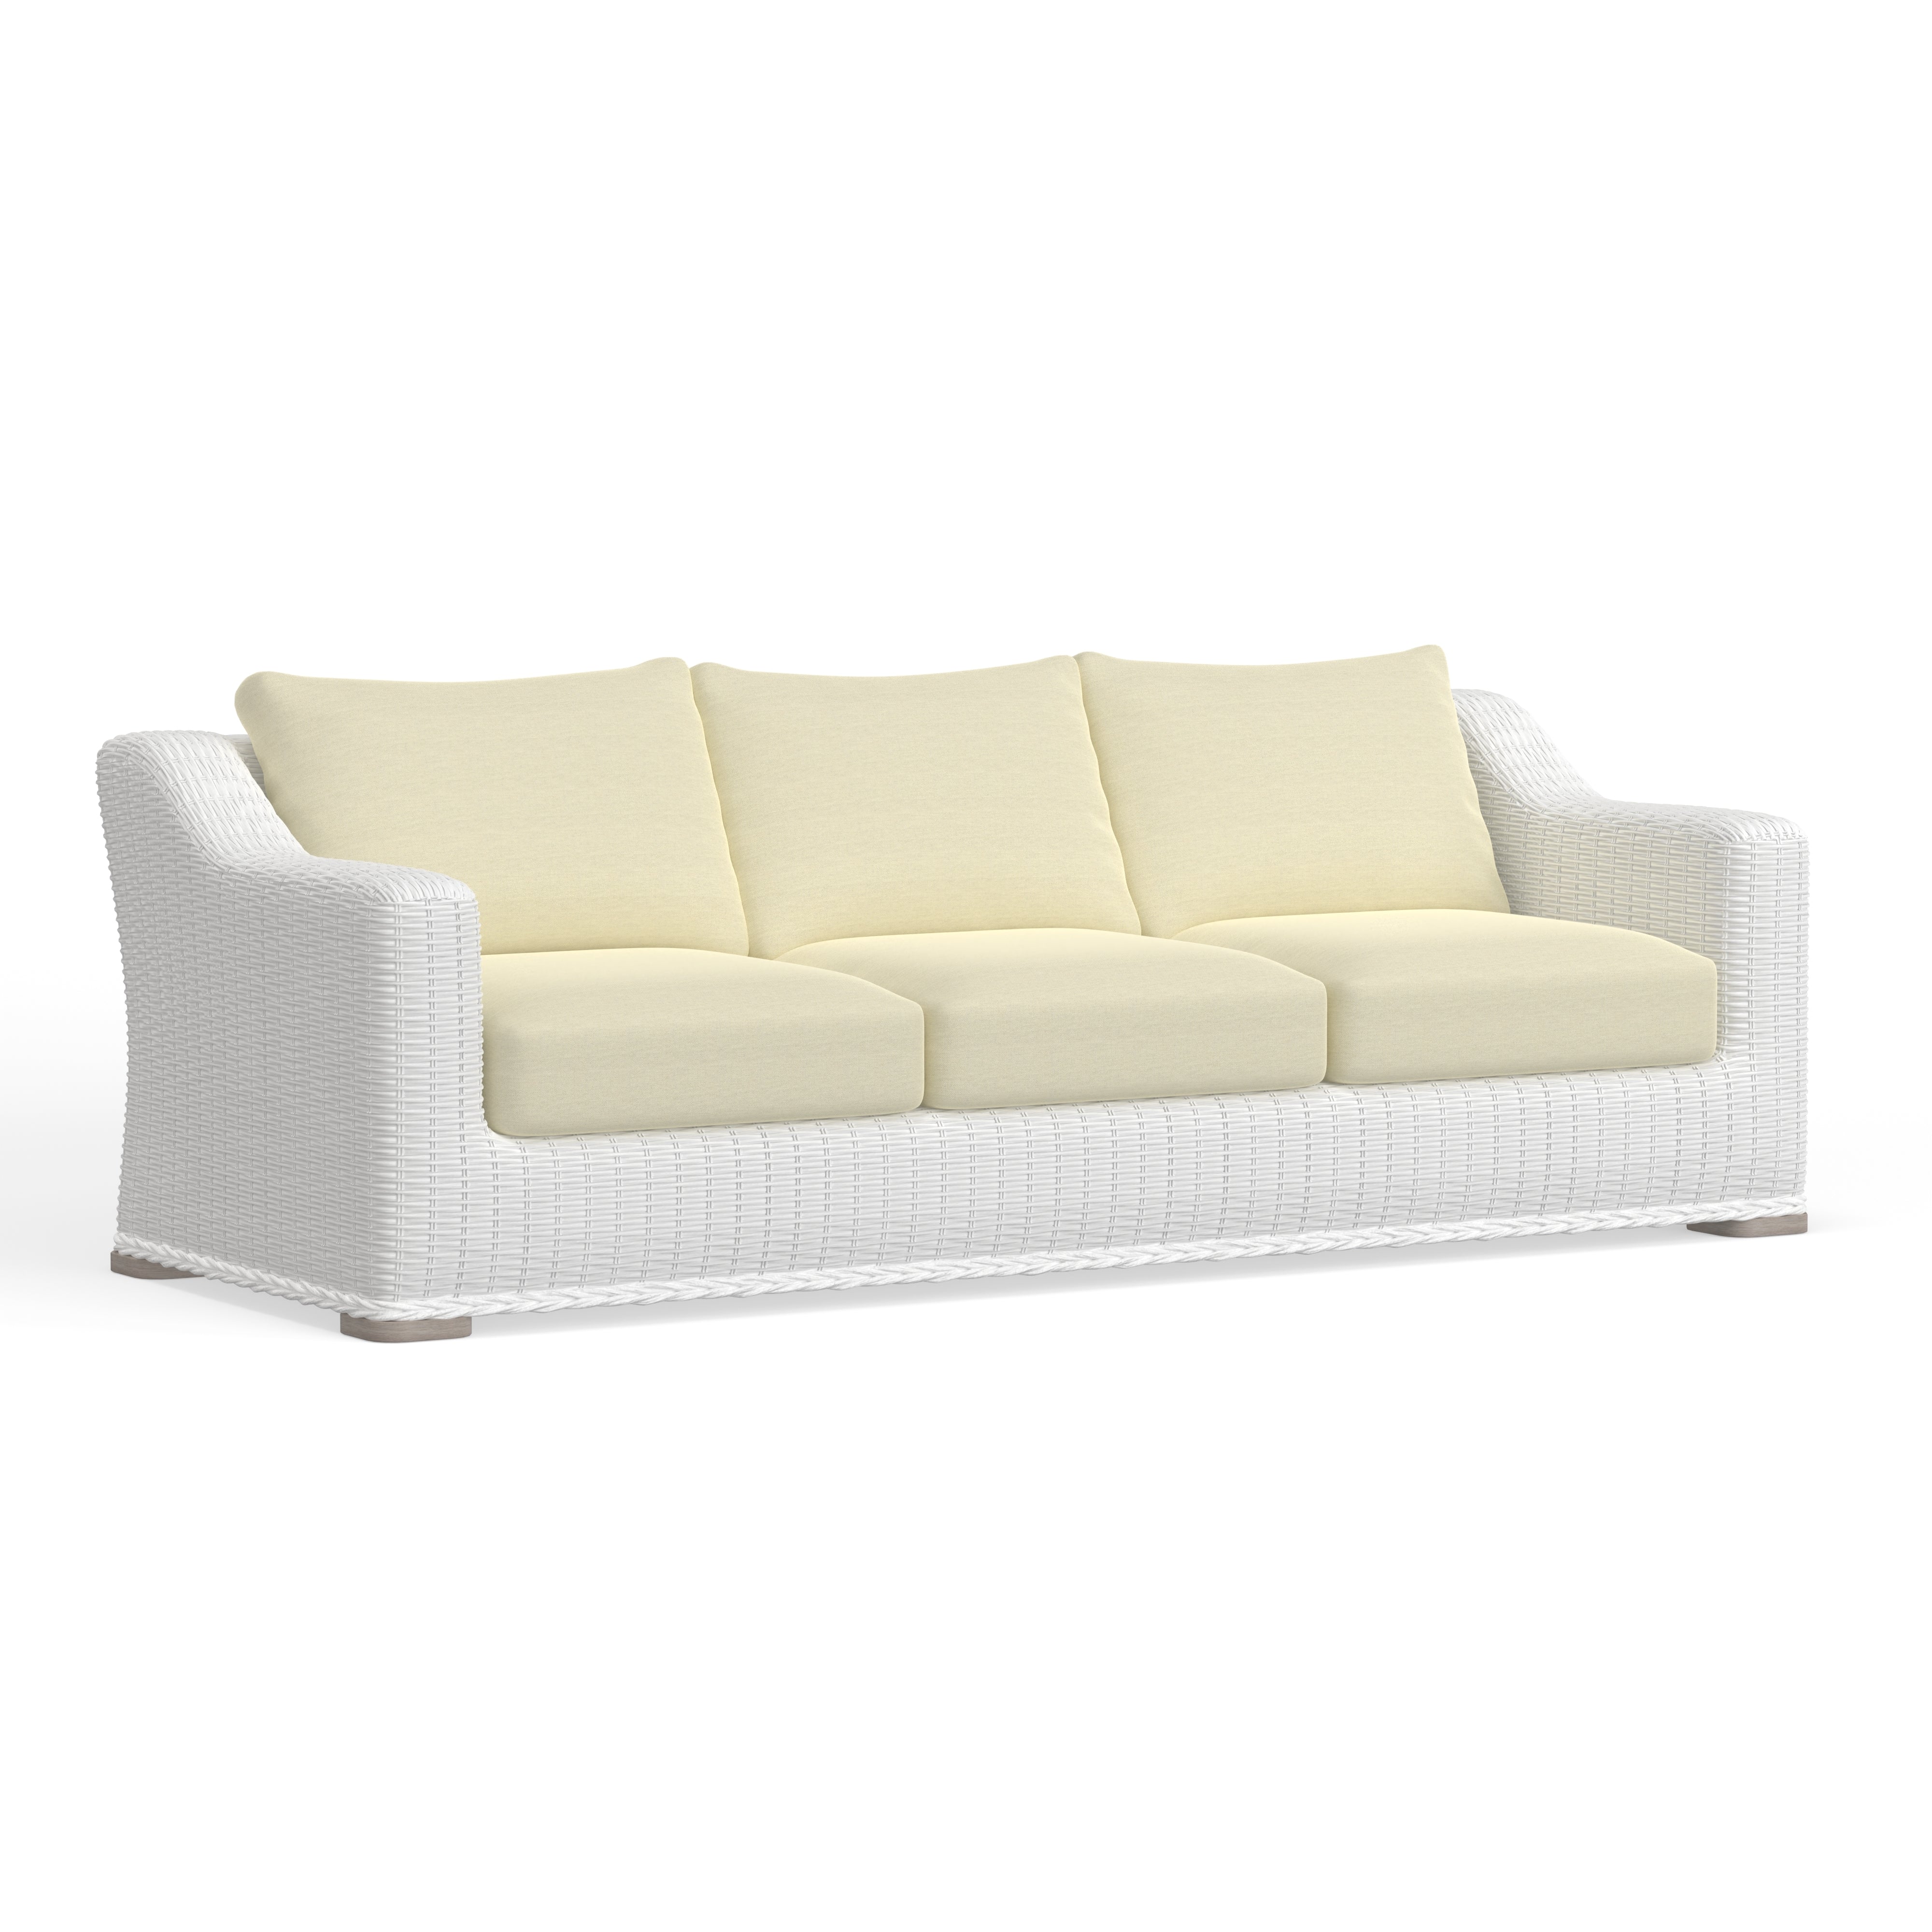 Best Value Sofa And Club Chairs For Outside